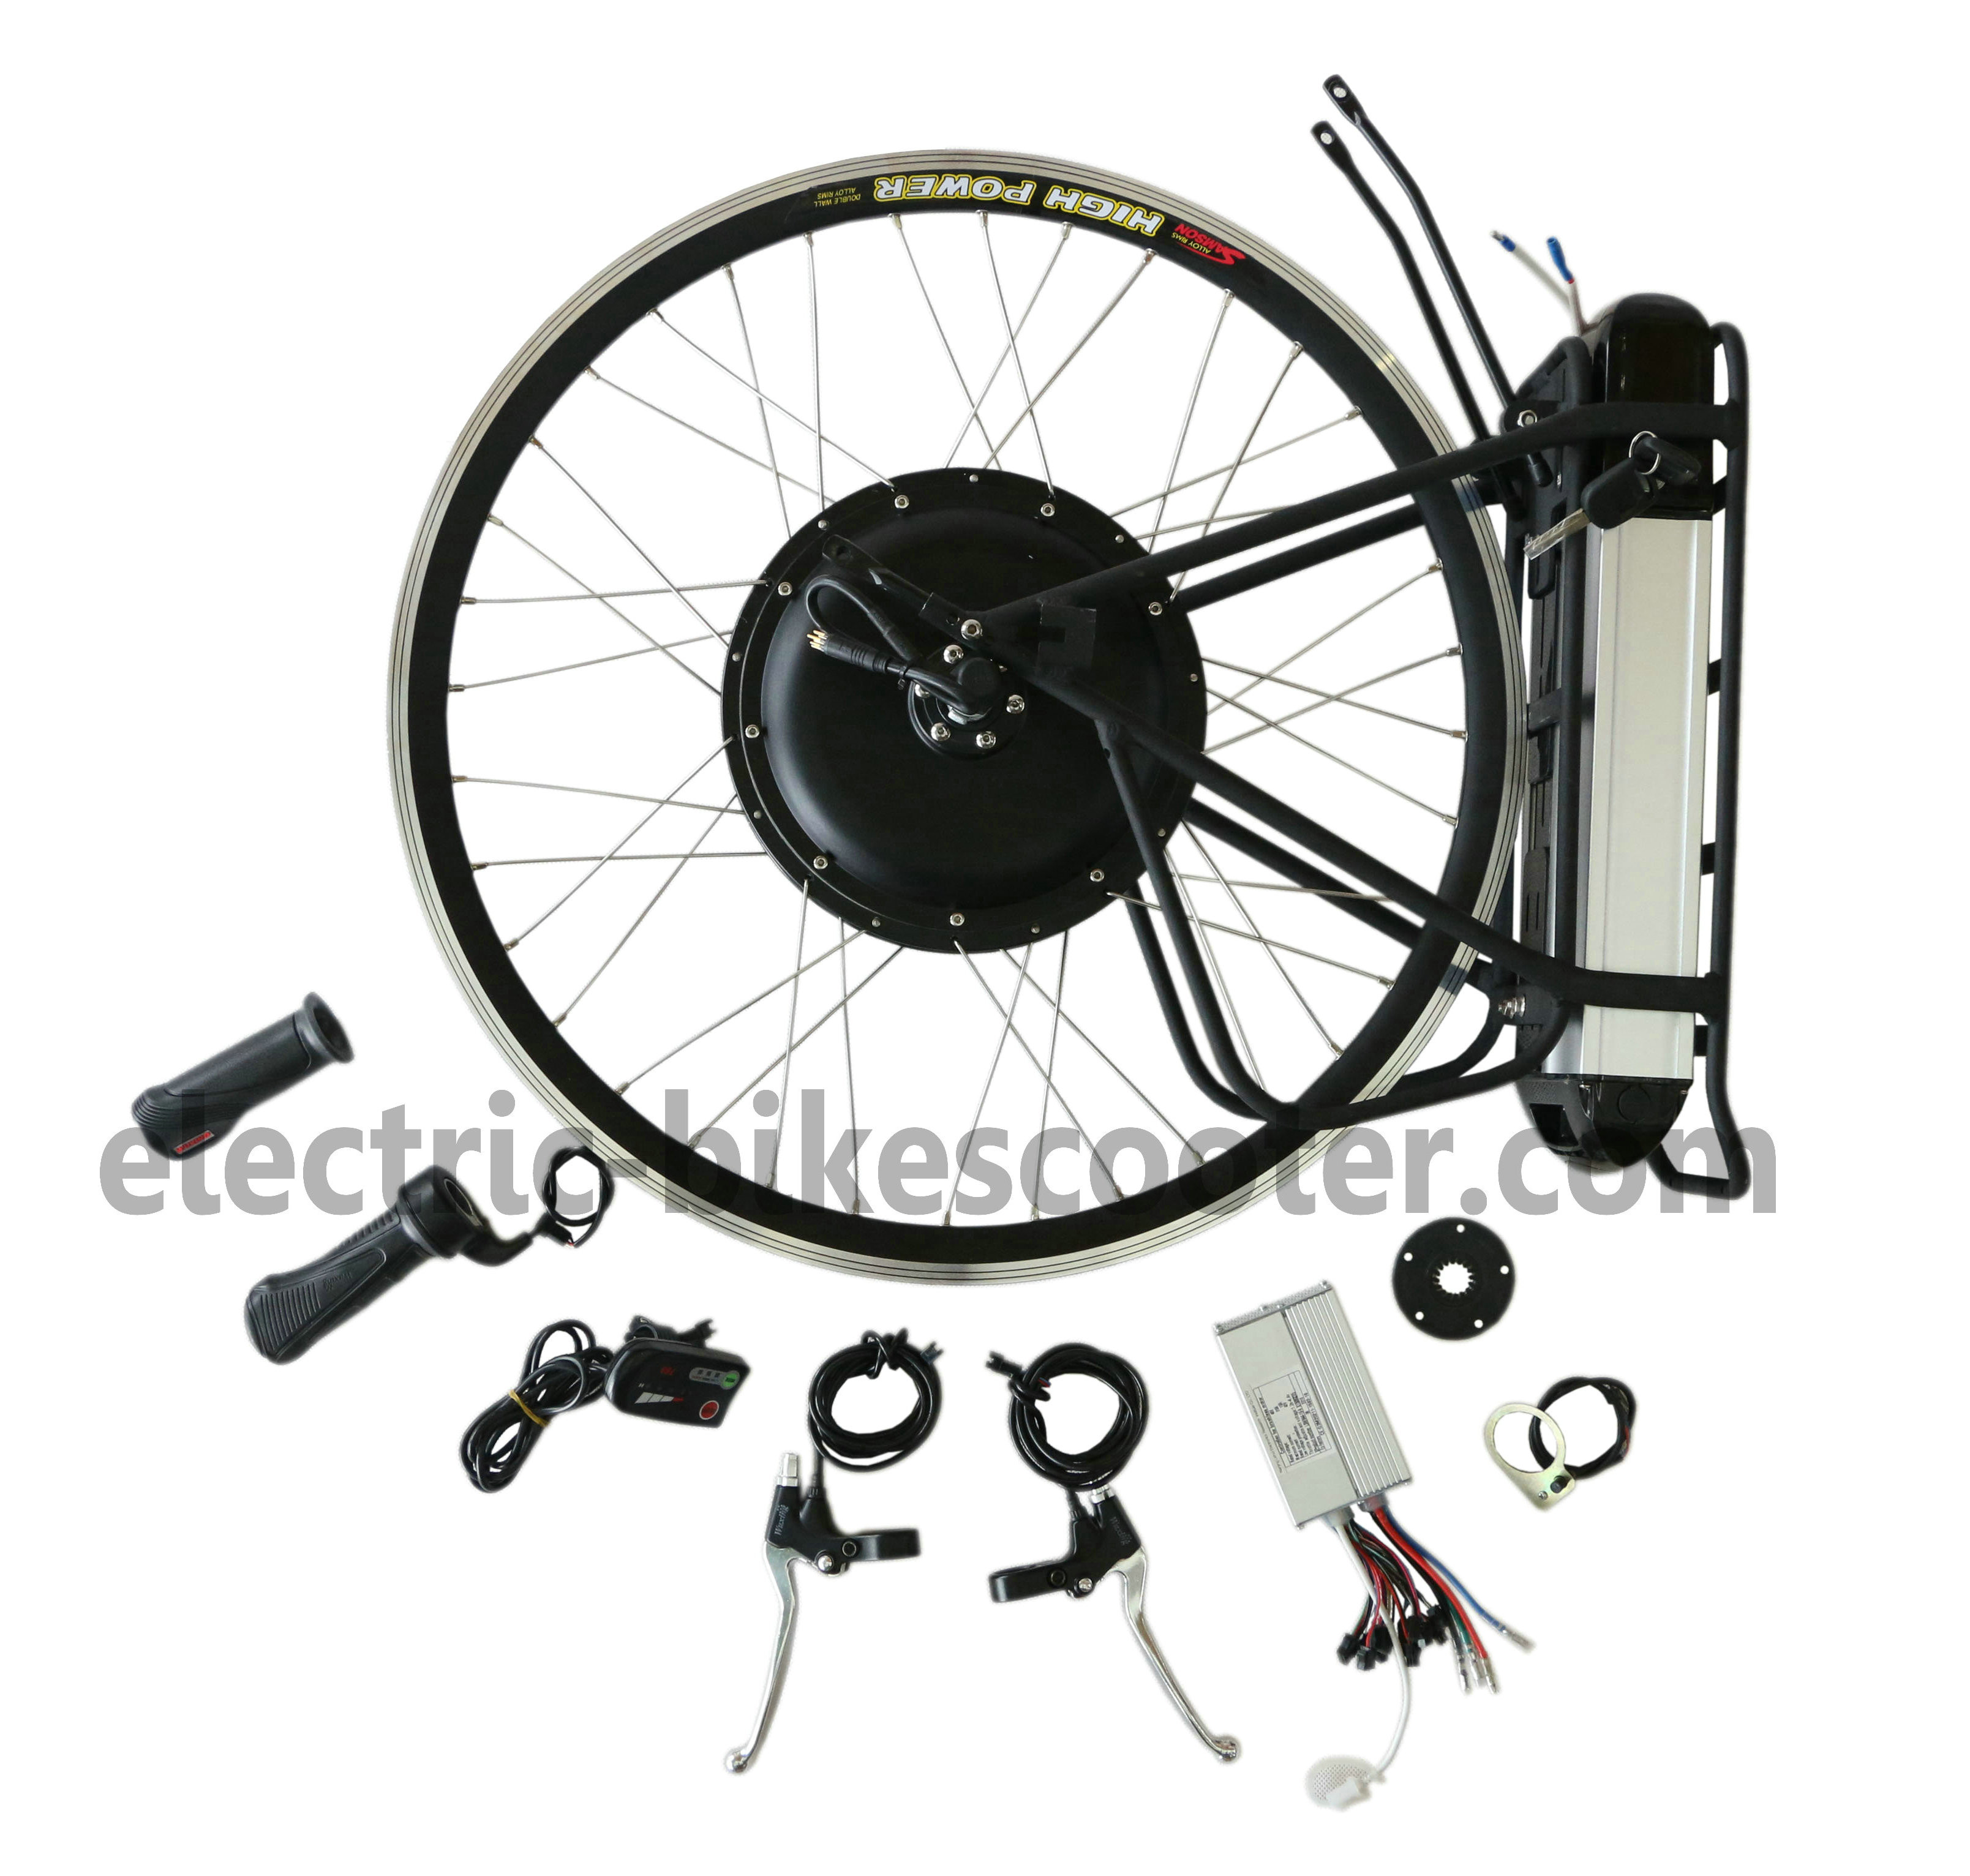 Wholesale 500W Ebike Conversion Kit , Rear Wheel Electric Bike Conversion Kit from china suppliers